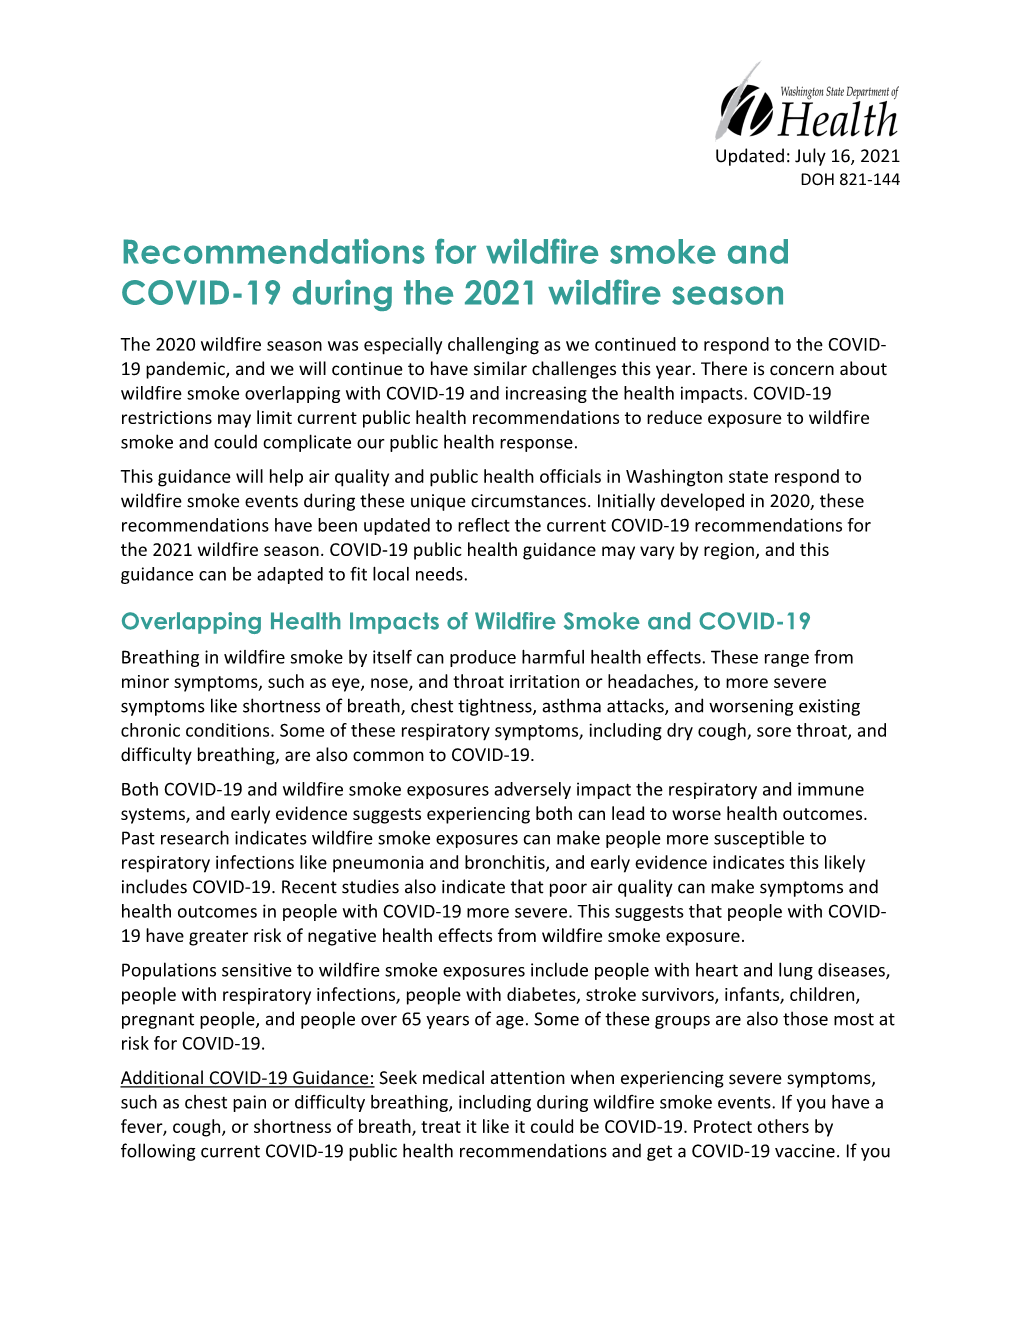 Recommendations for Wildfire Smoke and COVID-19 During the 2021 Wildfire Season